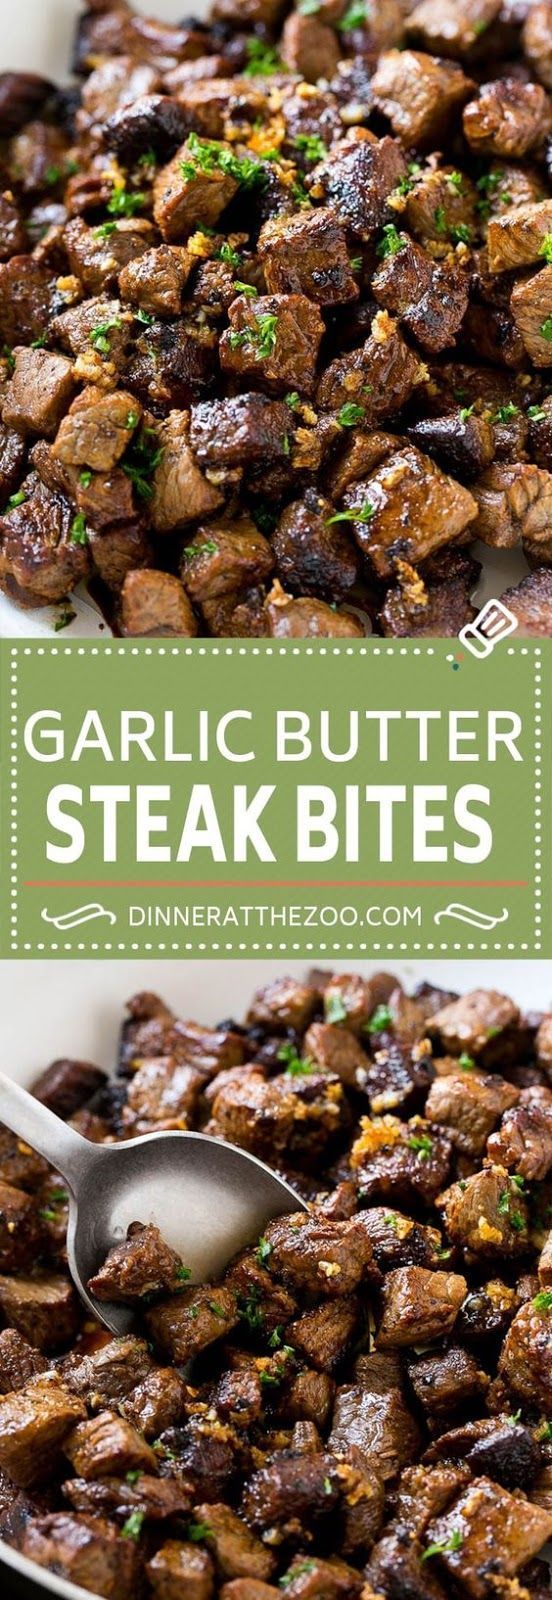 STEAK BITES WITH GARLIC BUTTER -   21 grilling recipes for kids
 ideas